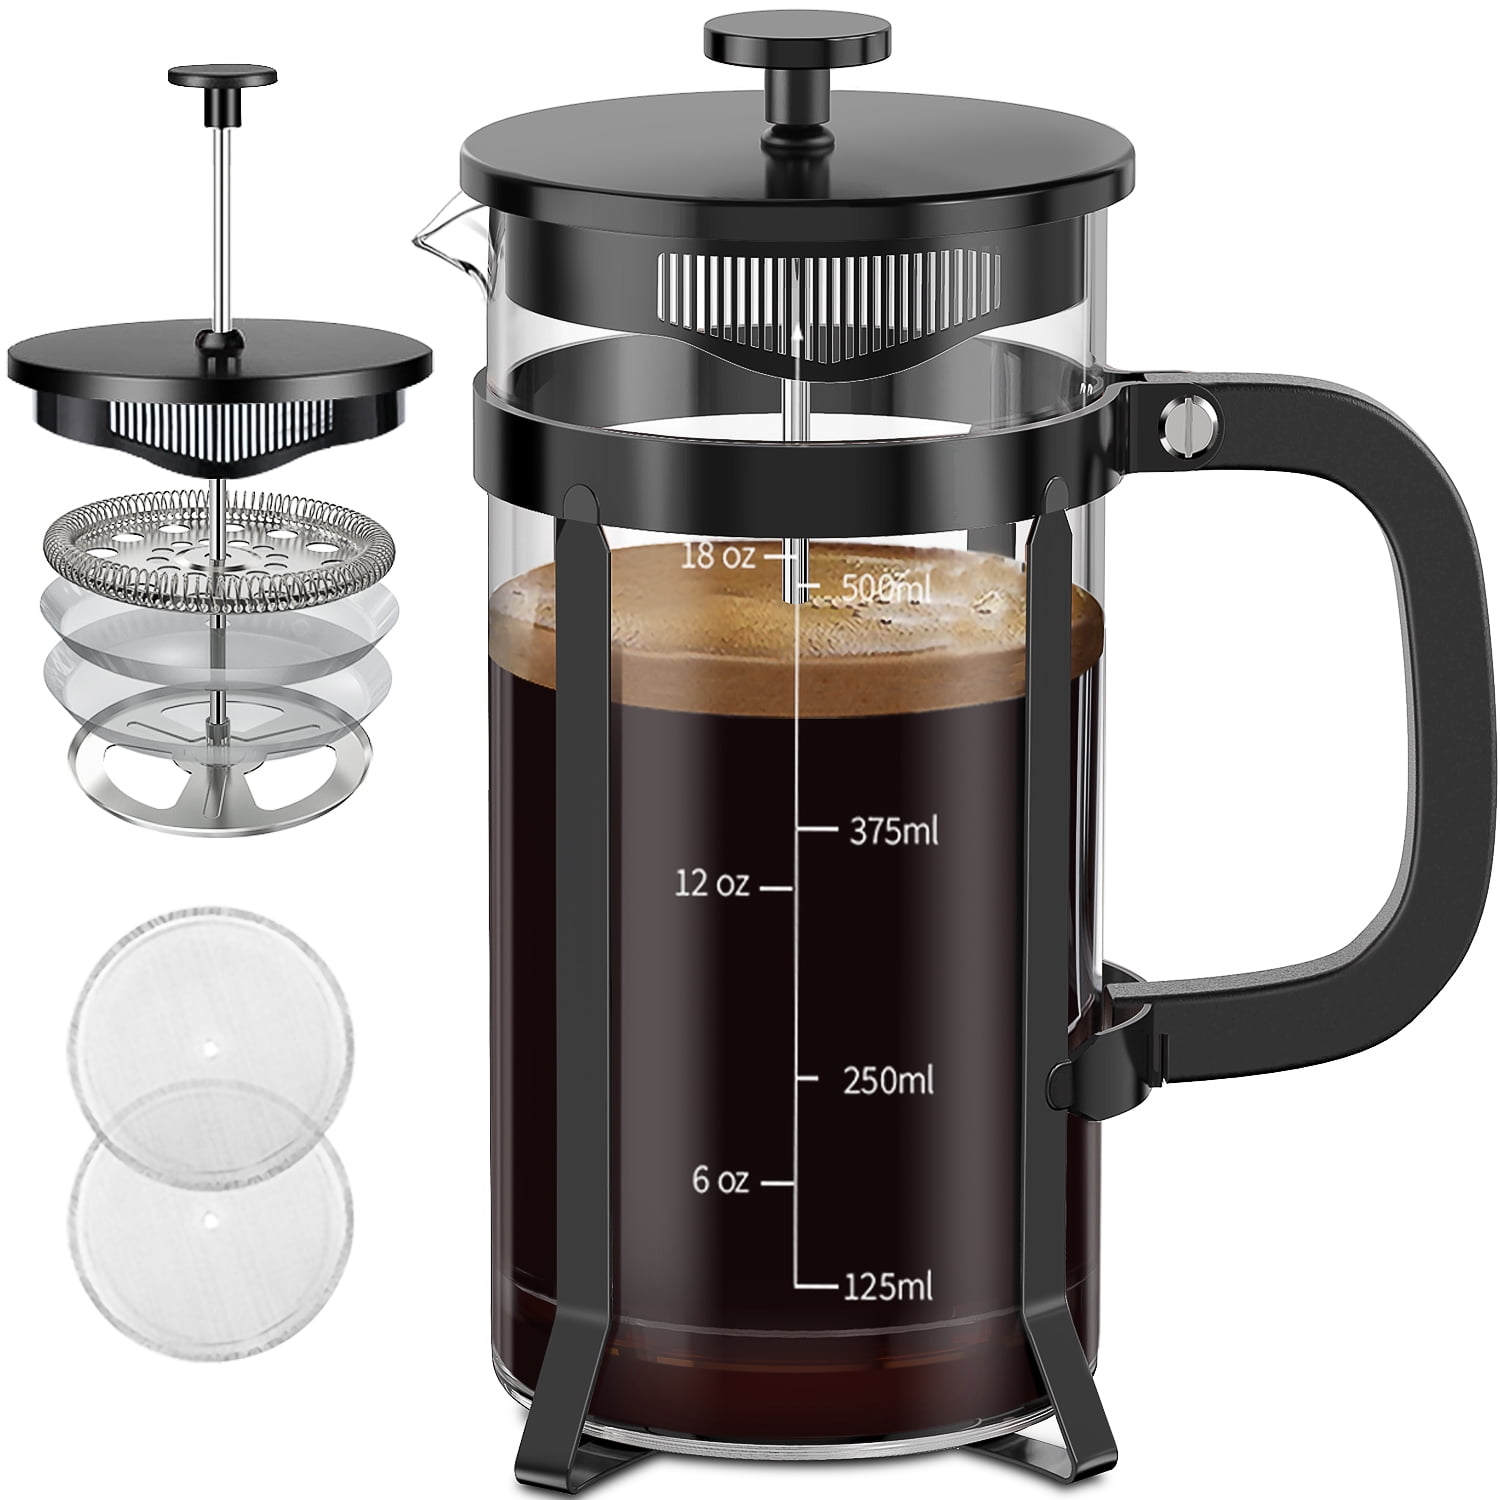 Cuisinox Double-Walled Stainless Steel French Press Coffee Maker, 1 Quart (32 oz)